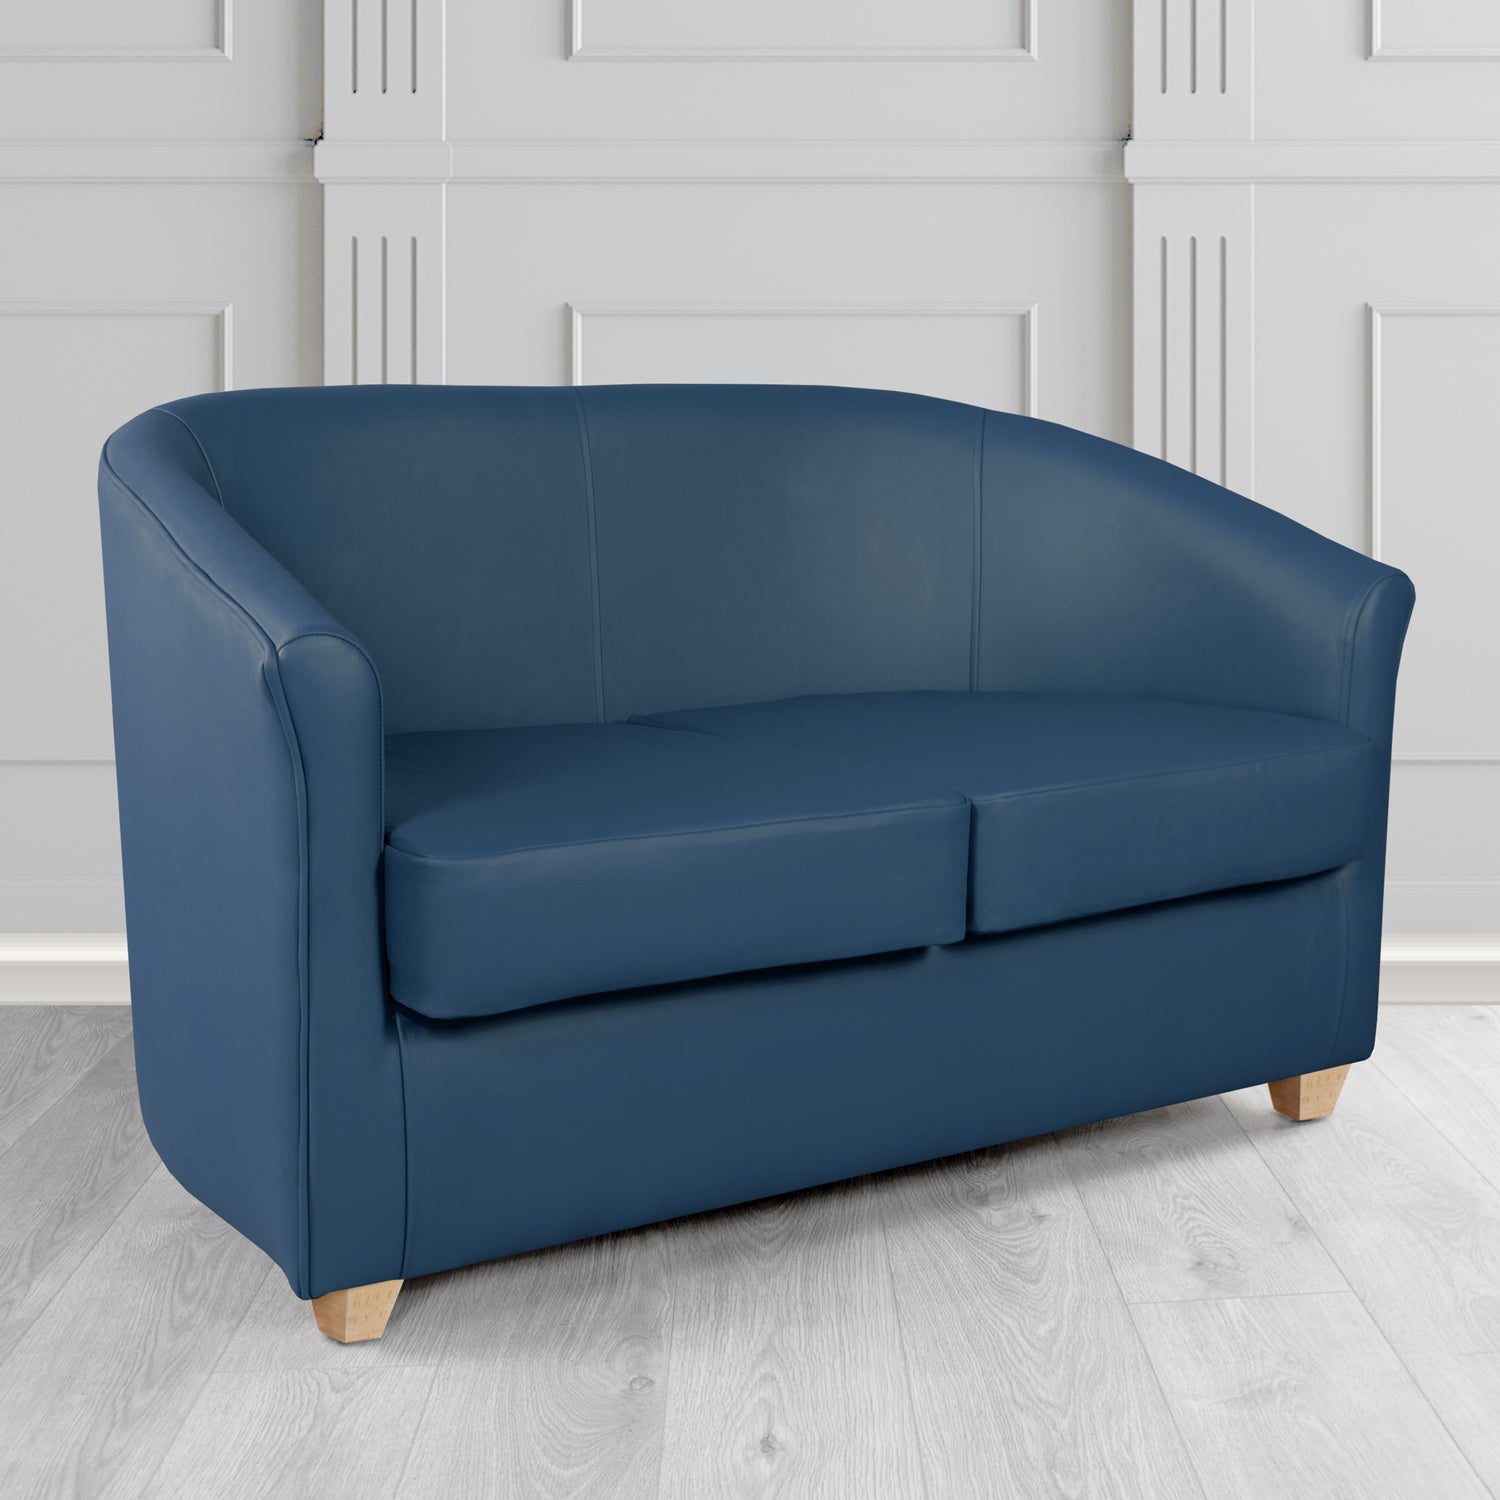 Cannes 2 Seater Tub Sofa in Just Colour Sapphire Blue Crib 5 Faux Leather - The Tub Chair Shop